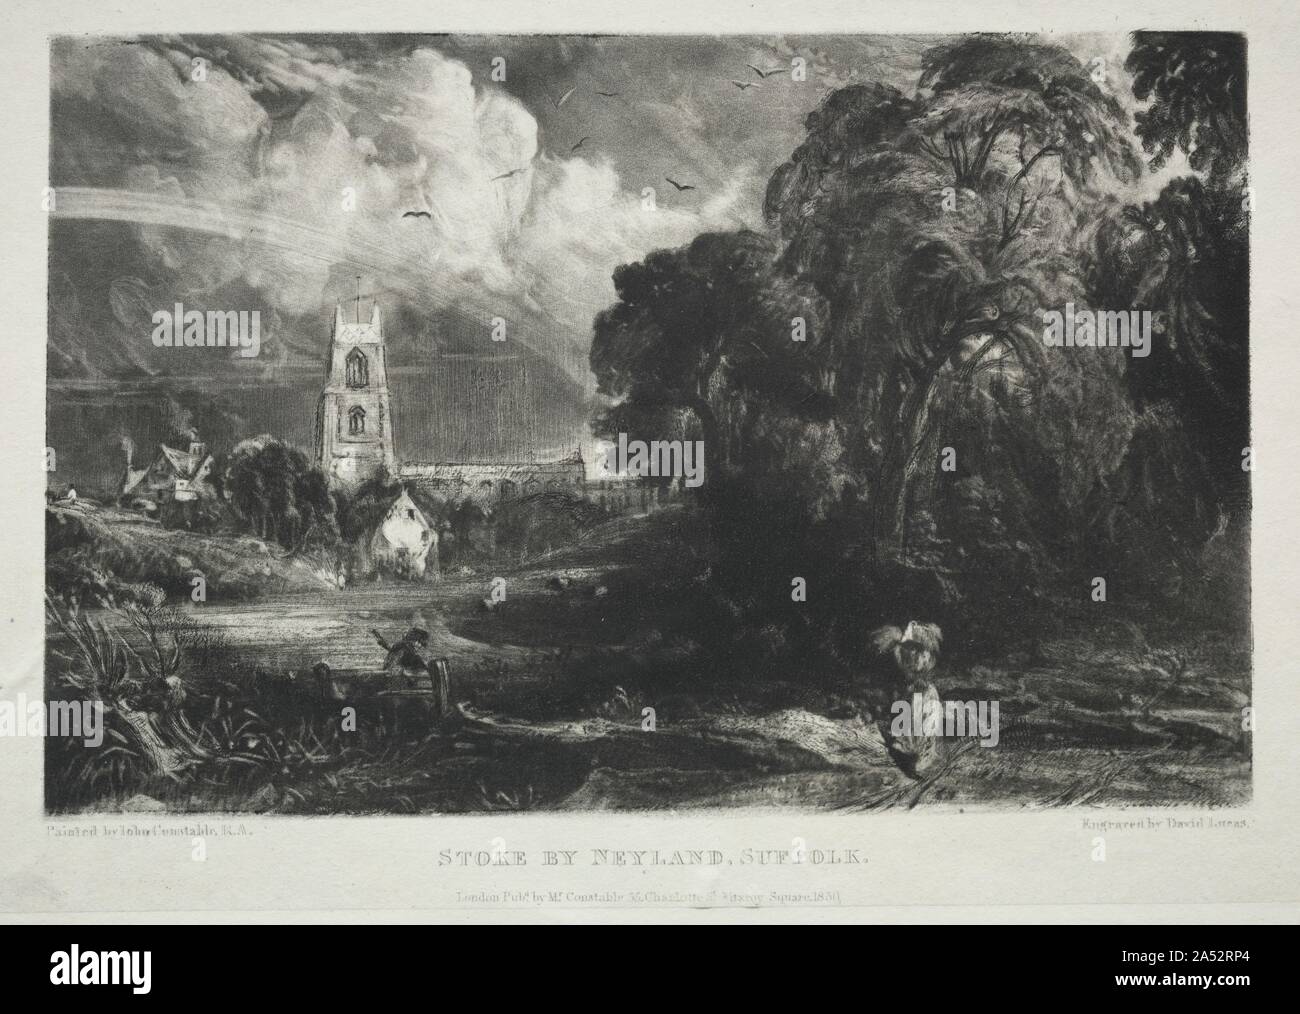 Various Subjects of Landscape, Characteristic of English Scenery from Pictures Painted by John Constable, R.A.: Stoke by Neyland, Suffolk, 1830. Stock Photo